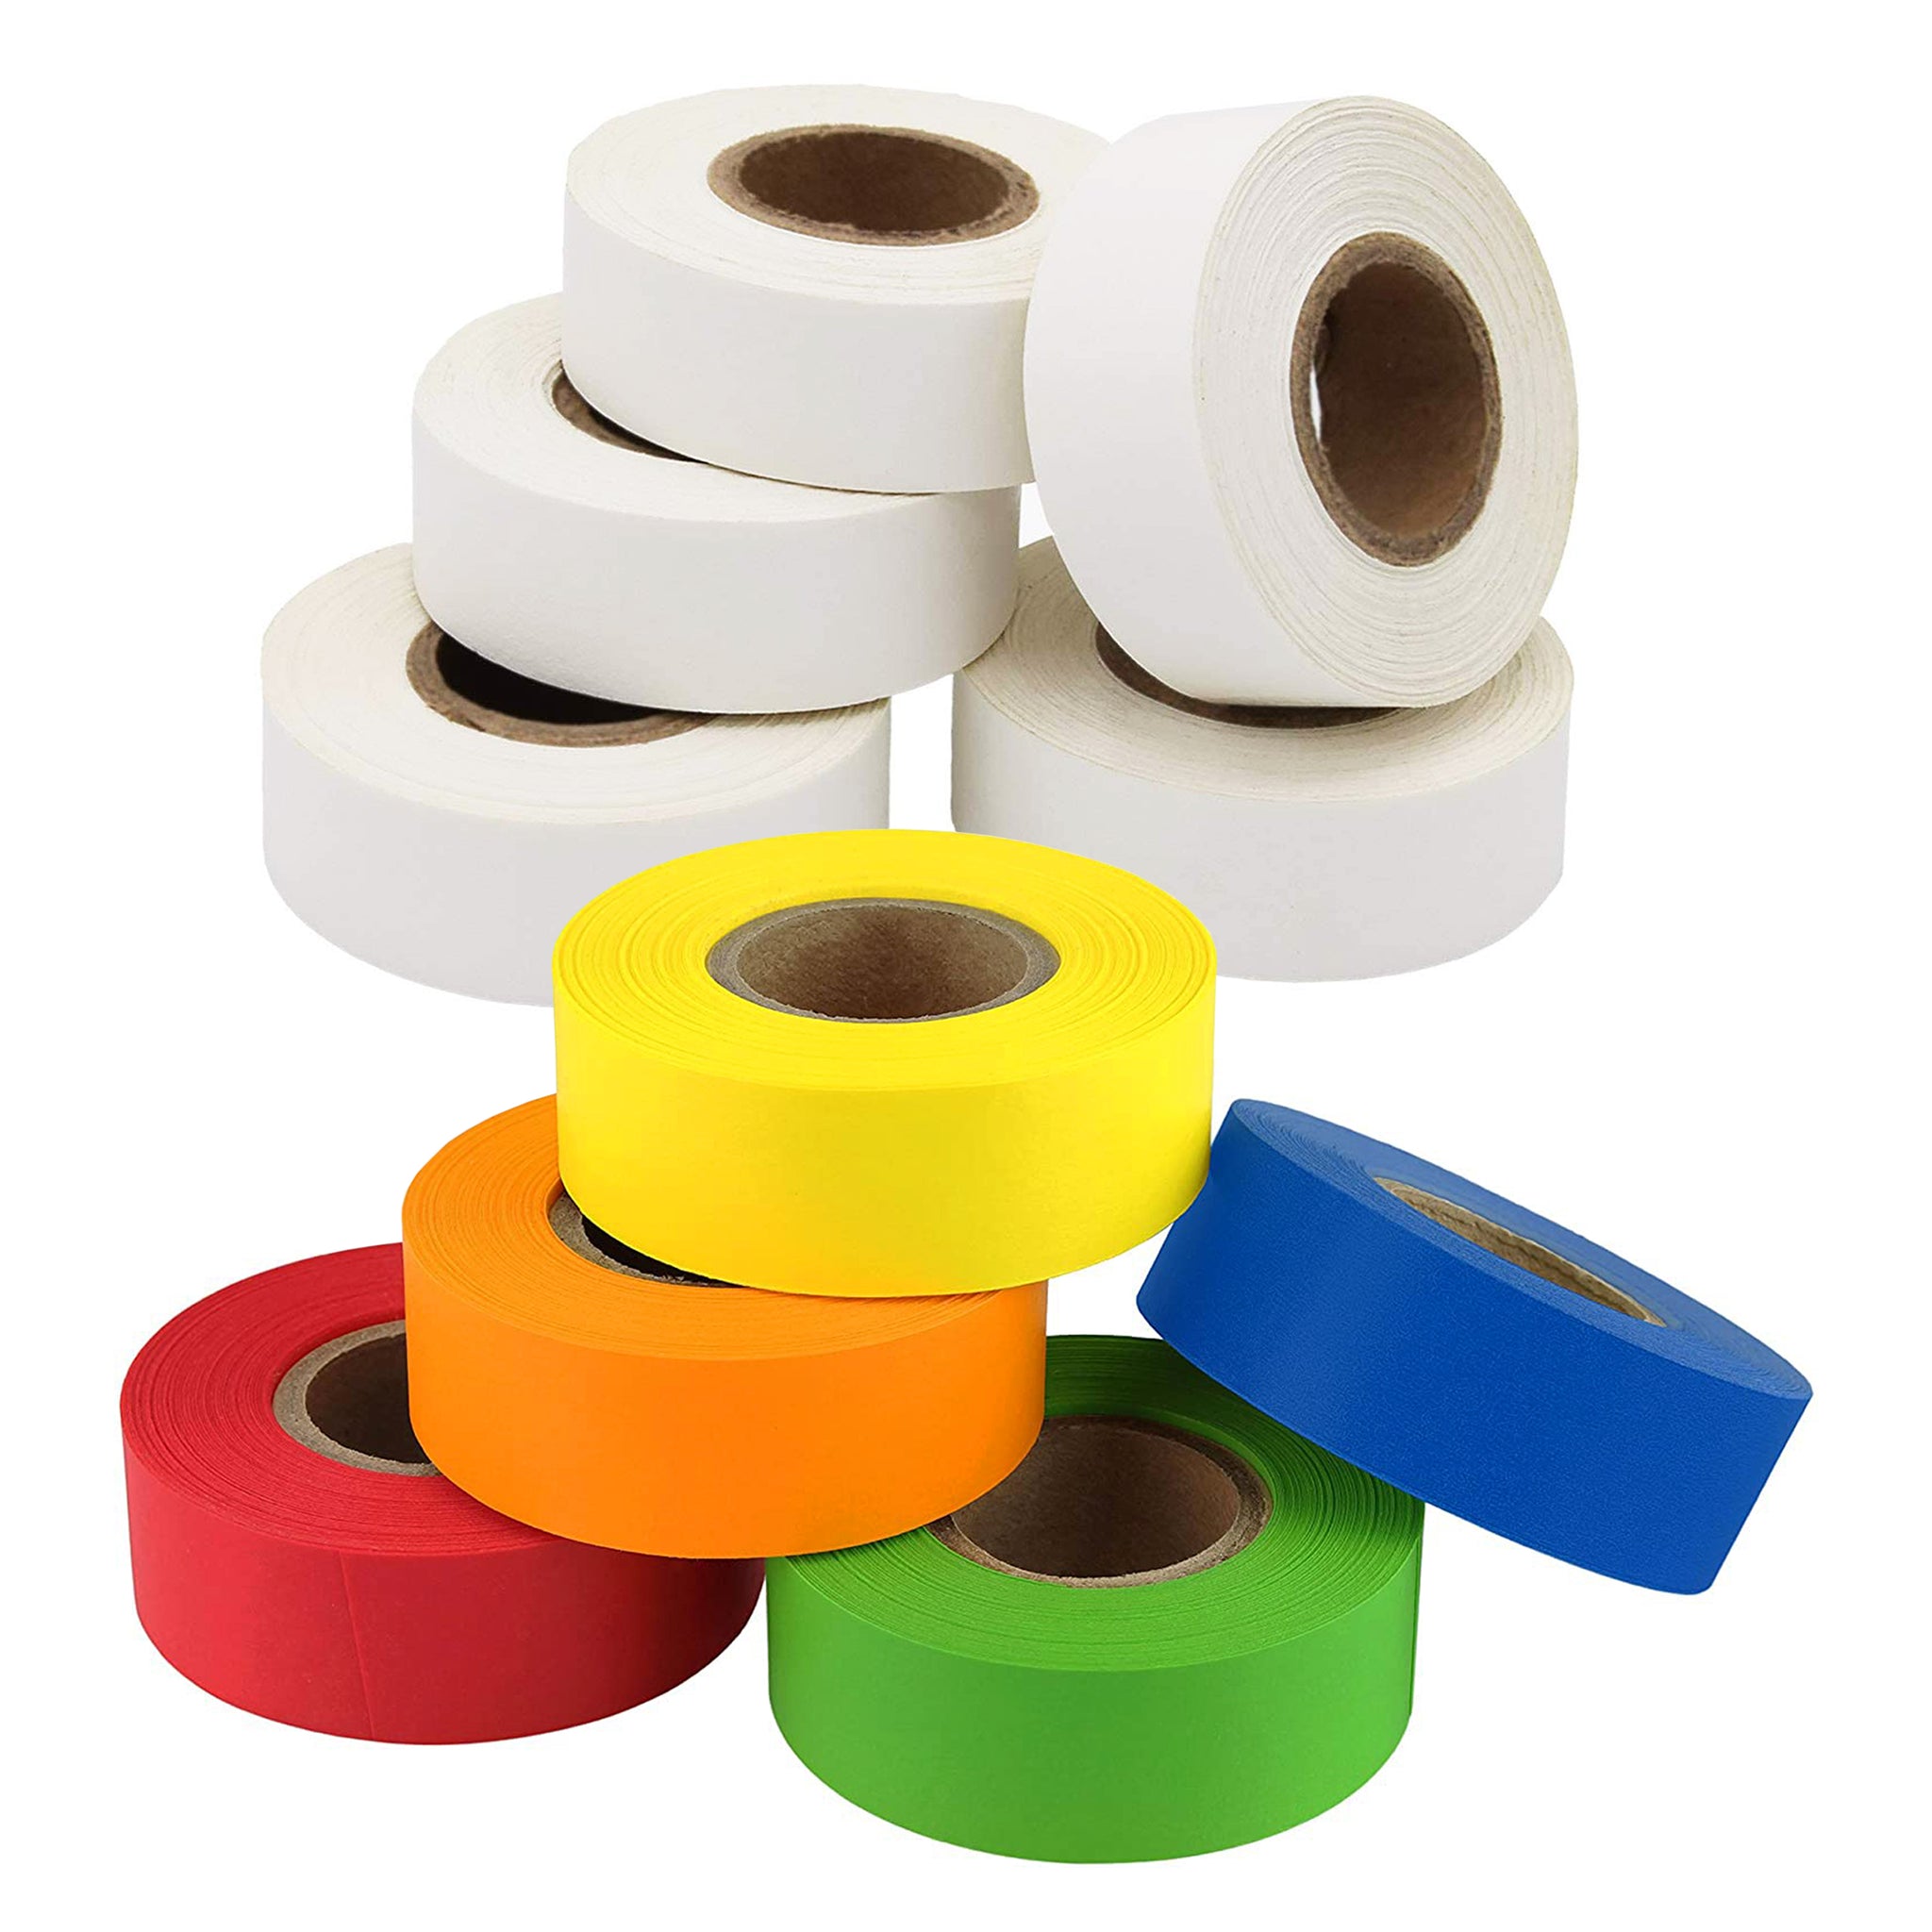 3/4 inch x 500 inch Removable Tape Value Pack, White and Multicolor, 10 Rolls, 500 inch/Roll